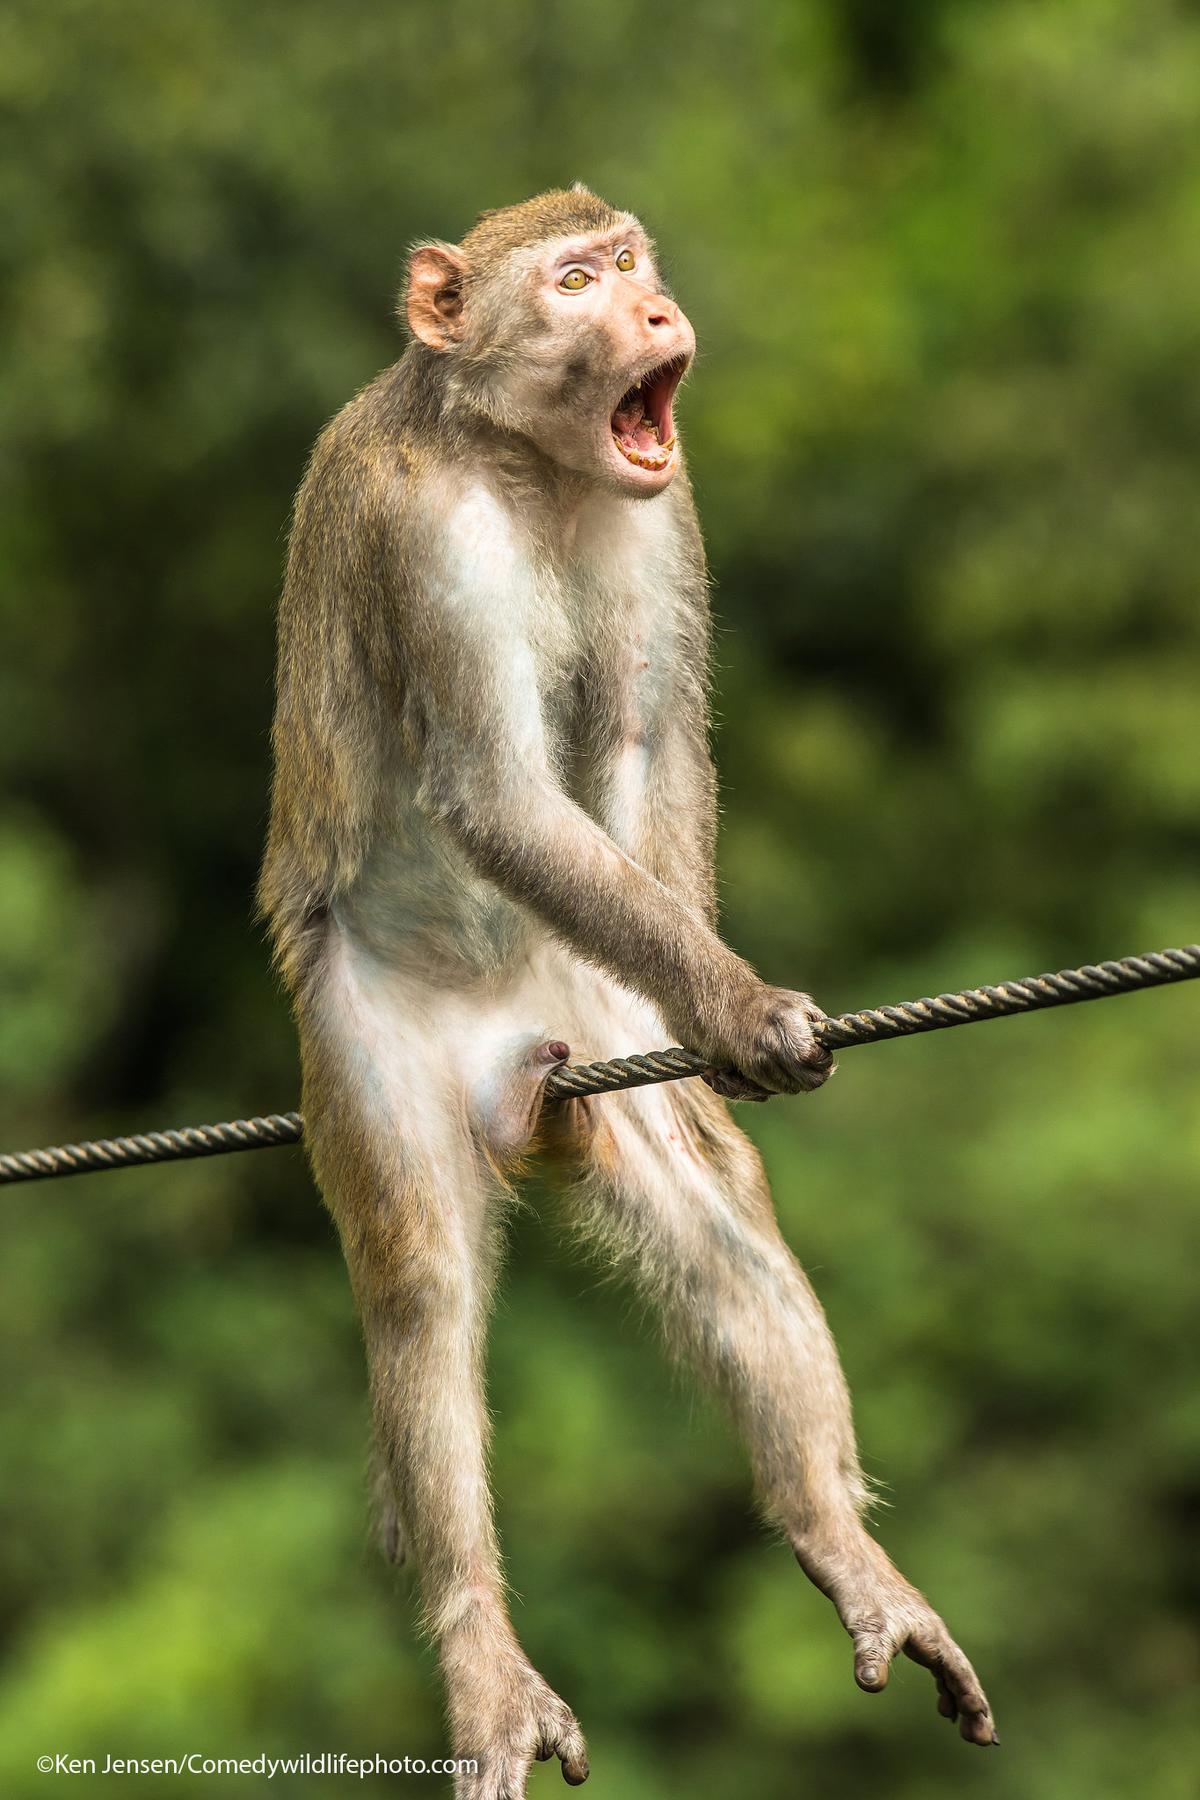 "Ouch!" by Ken Jensen. A golden silk monkey in Yunnan, China—this is actually a show of aggression. However, in the position that the monkey is in, it looks quite painful! (Courtesy of /<a href="https://www.facebook.com/comedywildlifephotoawards">Comedy Wildlife PhotographyAwards 2021</a>)